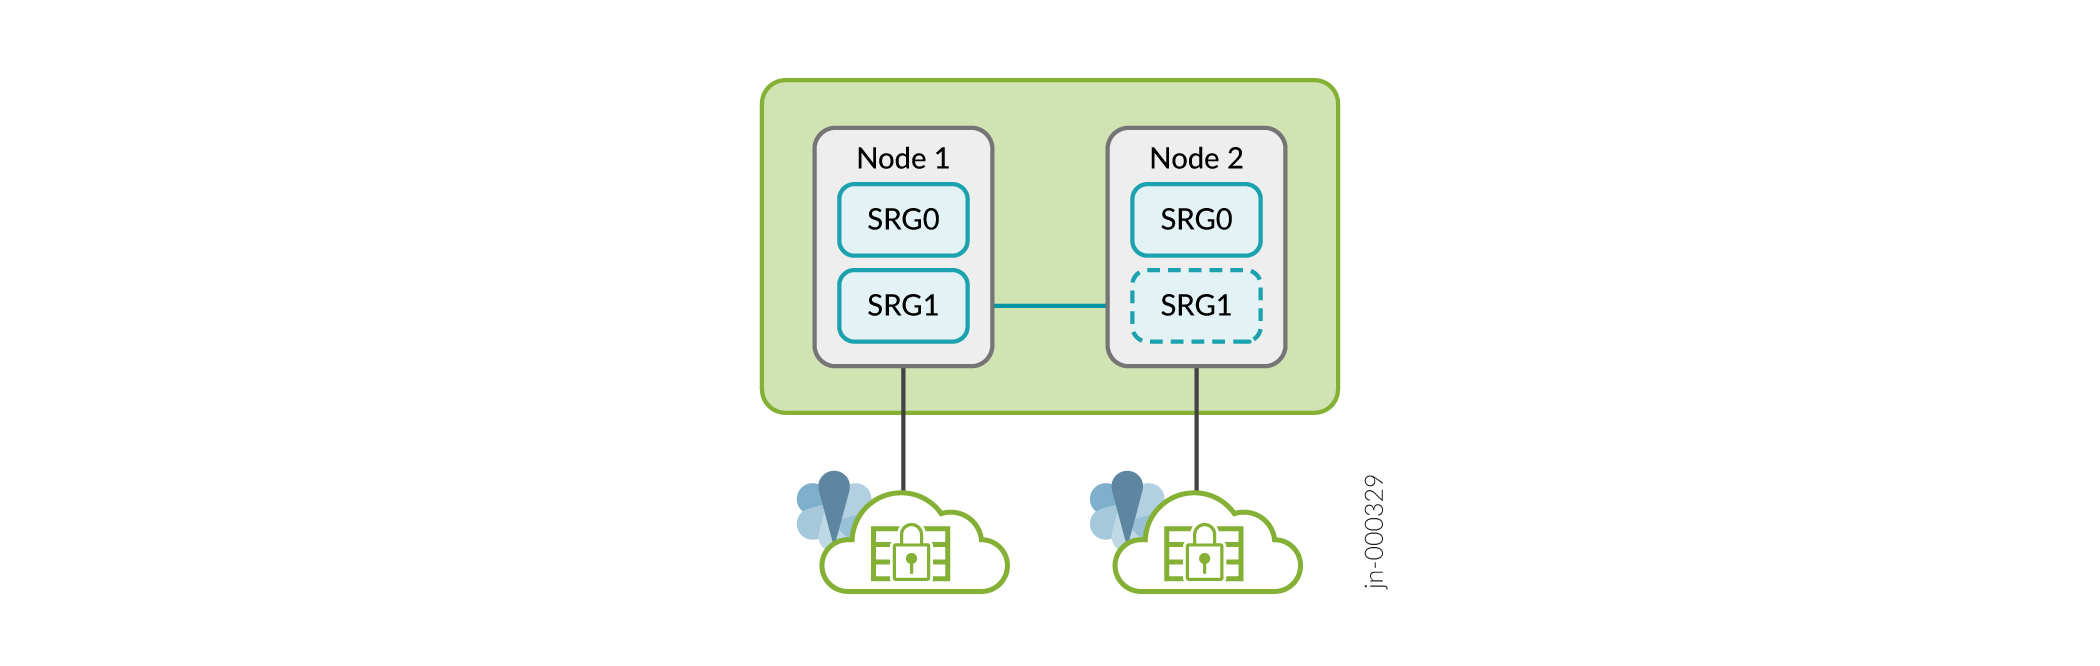 Single SRG Support in Multinode High Availability (Active-Backup Mode)